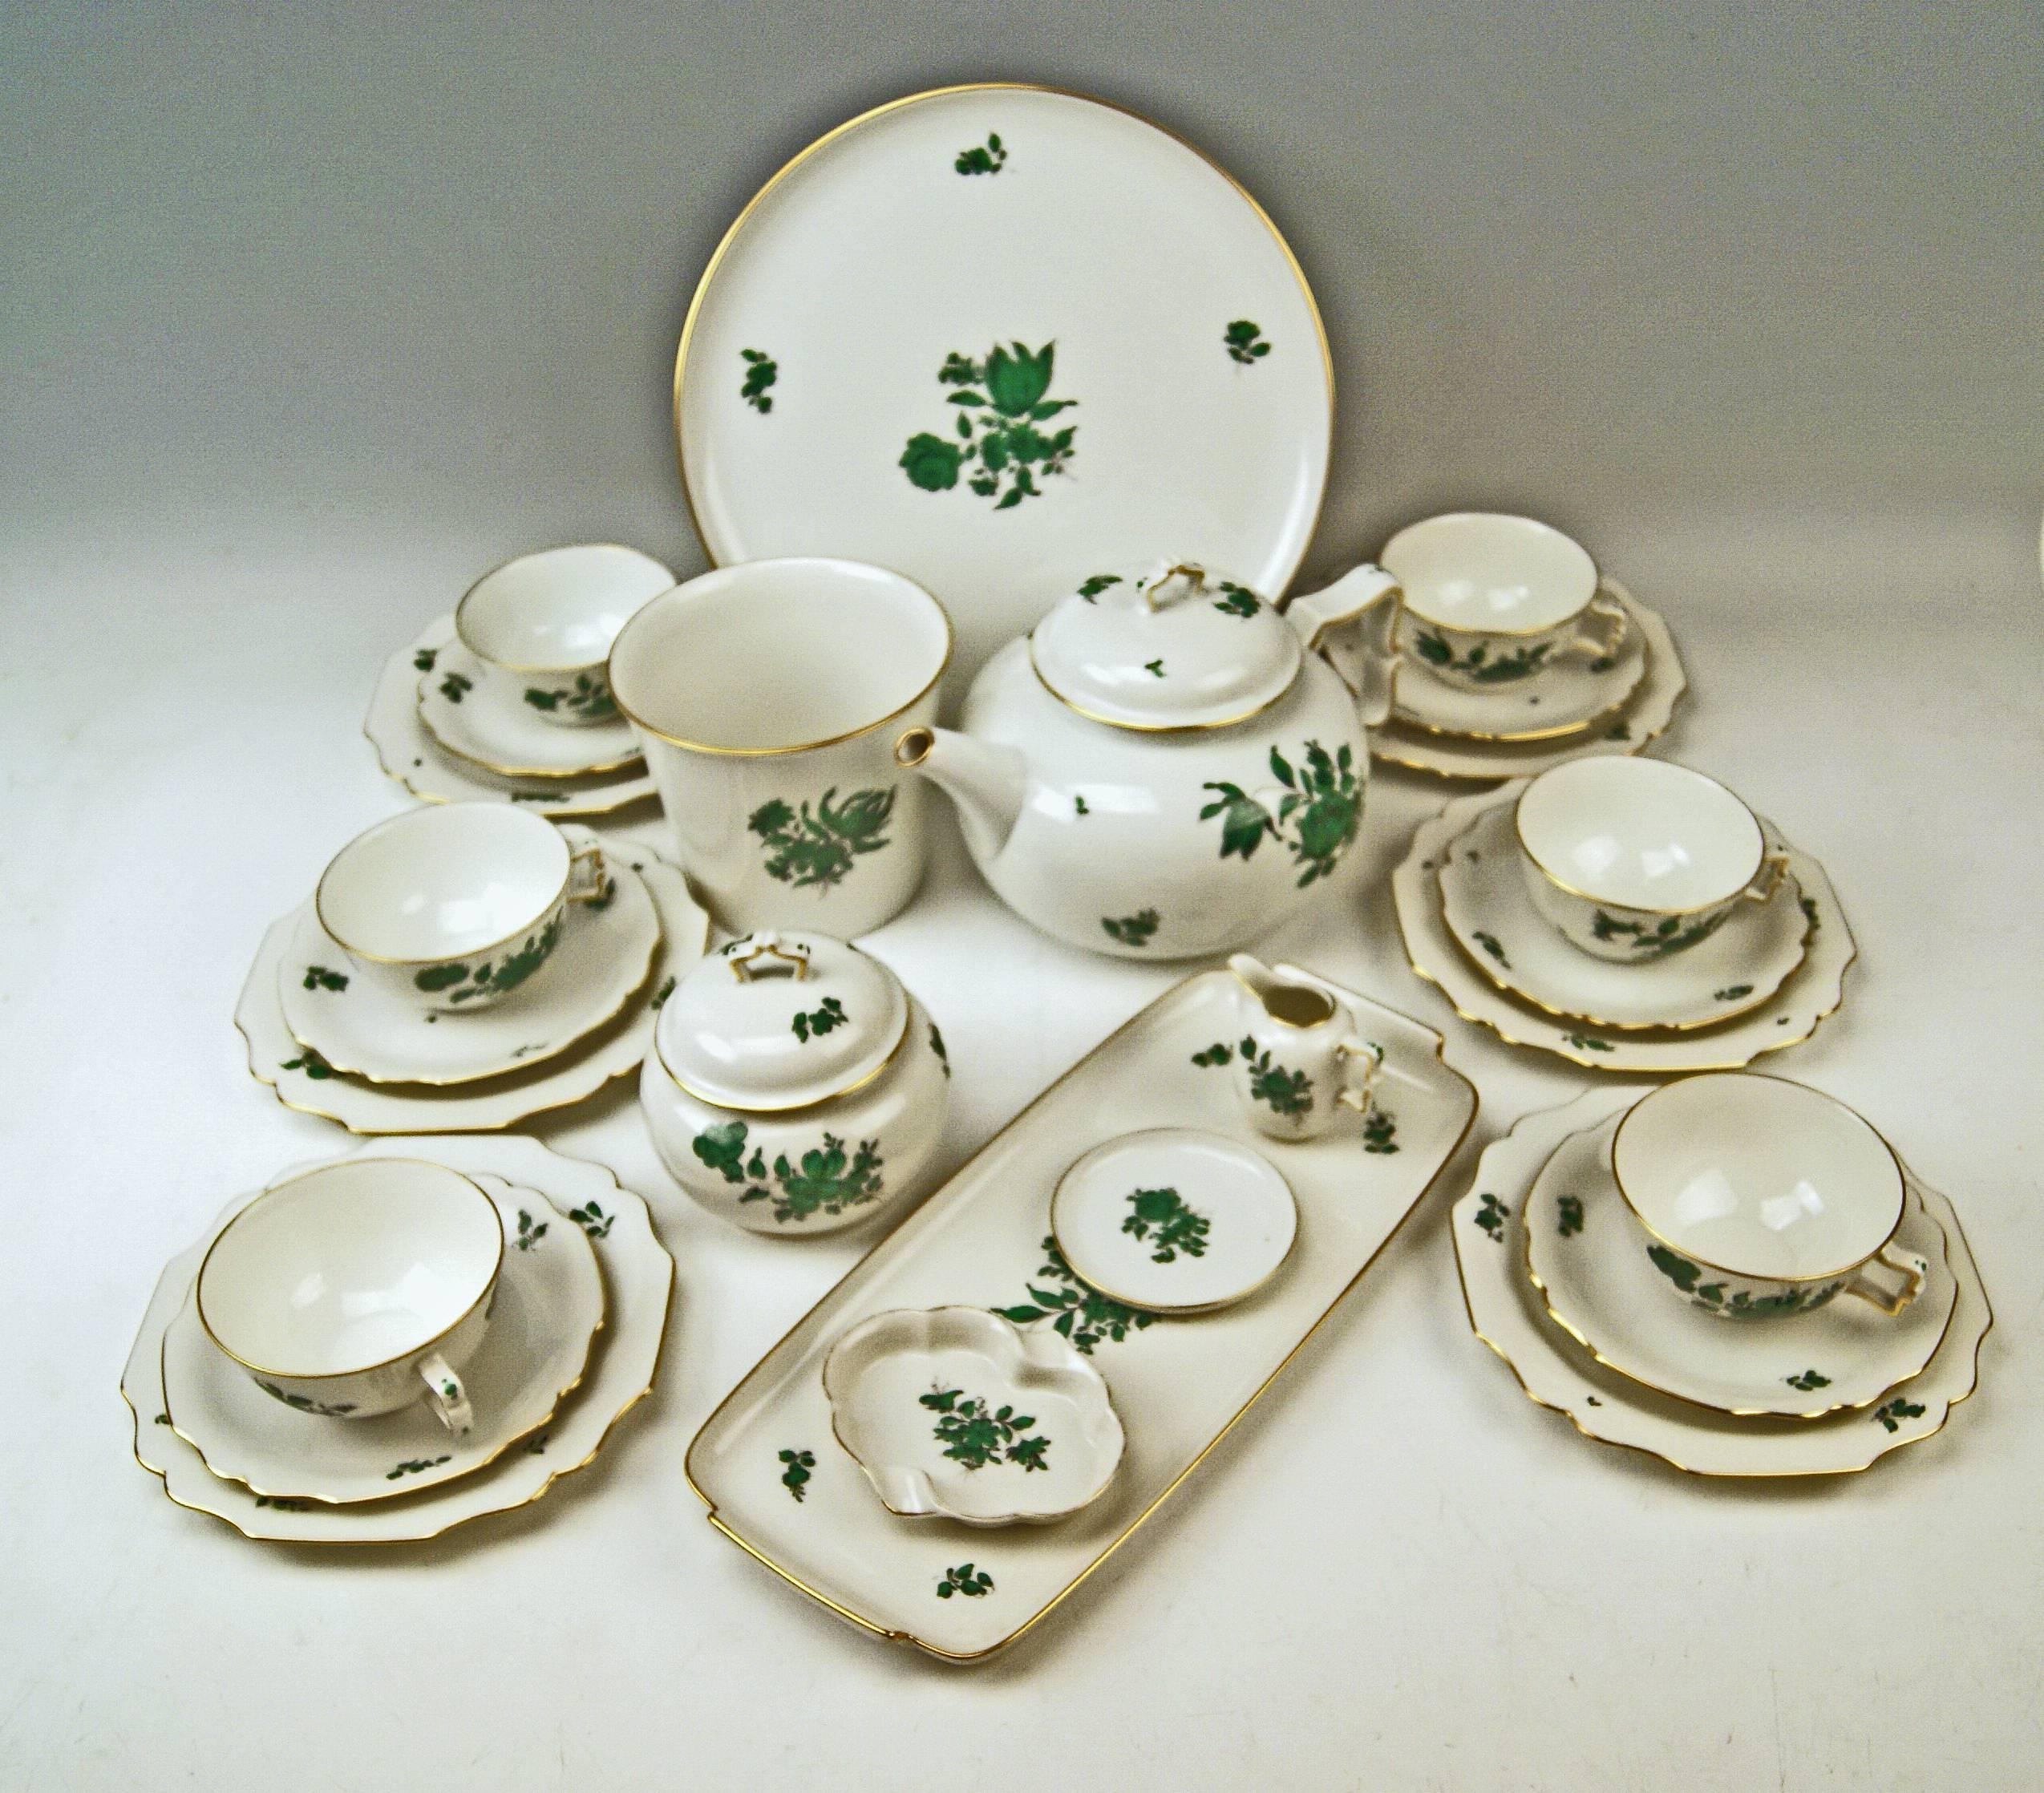 We invite you here to look at a splendid as well as nicest Augarten Vienna tea set for six persons: 

This Augarten tea set is of finest elegance due to its delicate green monochrome paintings depicting various flower's blossoms with leaves as